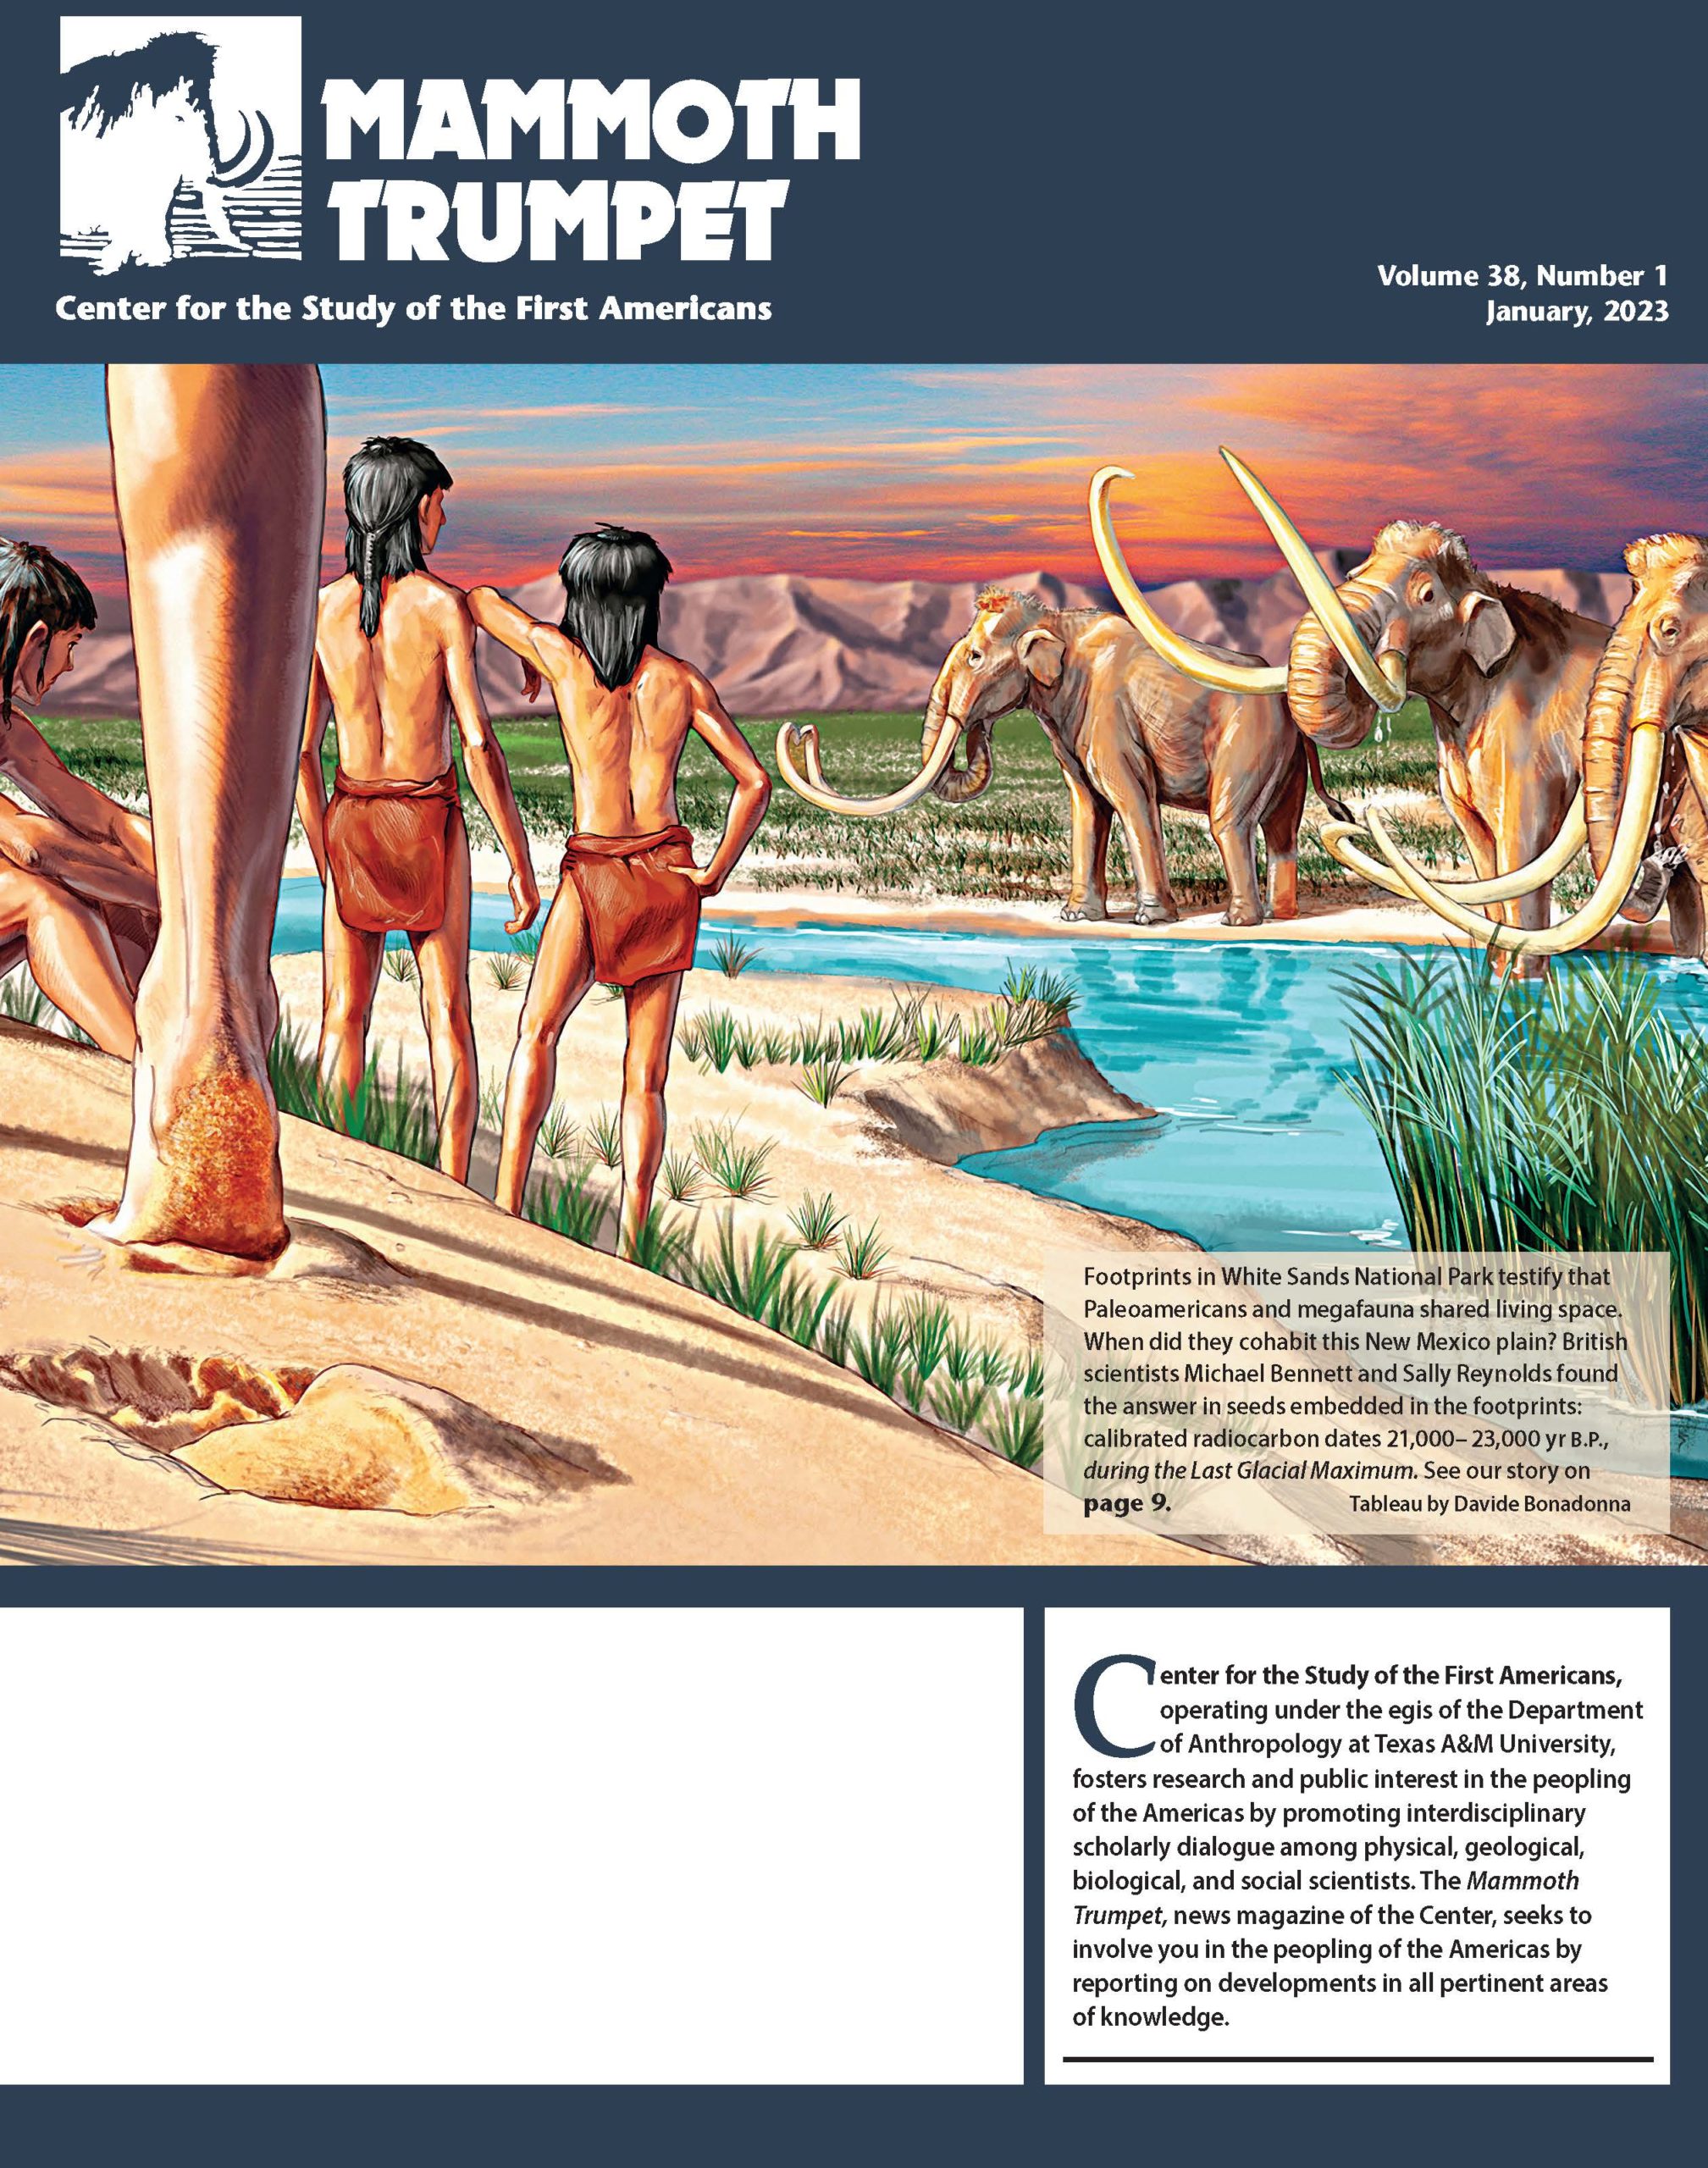 January mammoth trumpet cover. Painting of Paleoamericans and animals sharing space in ancient New Mexico.